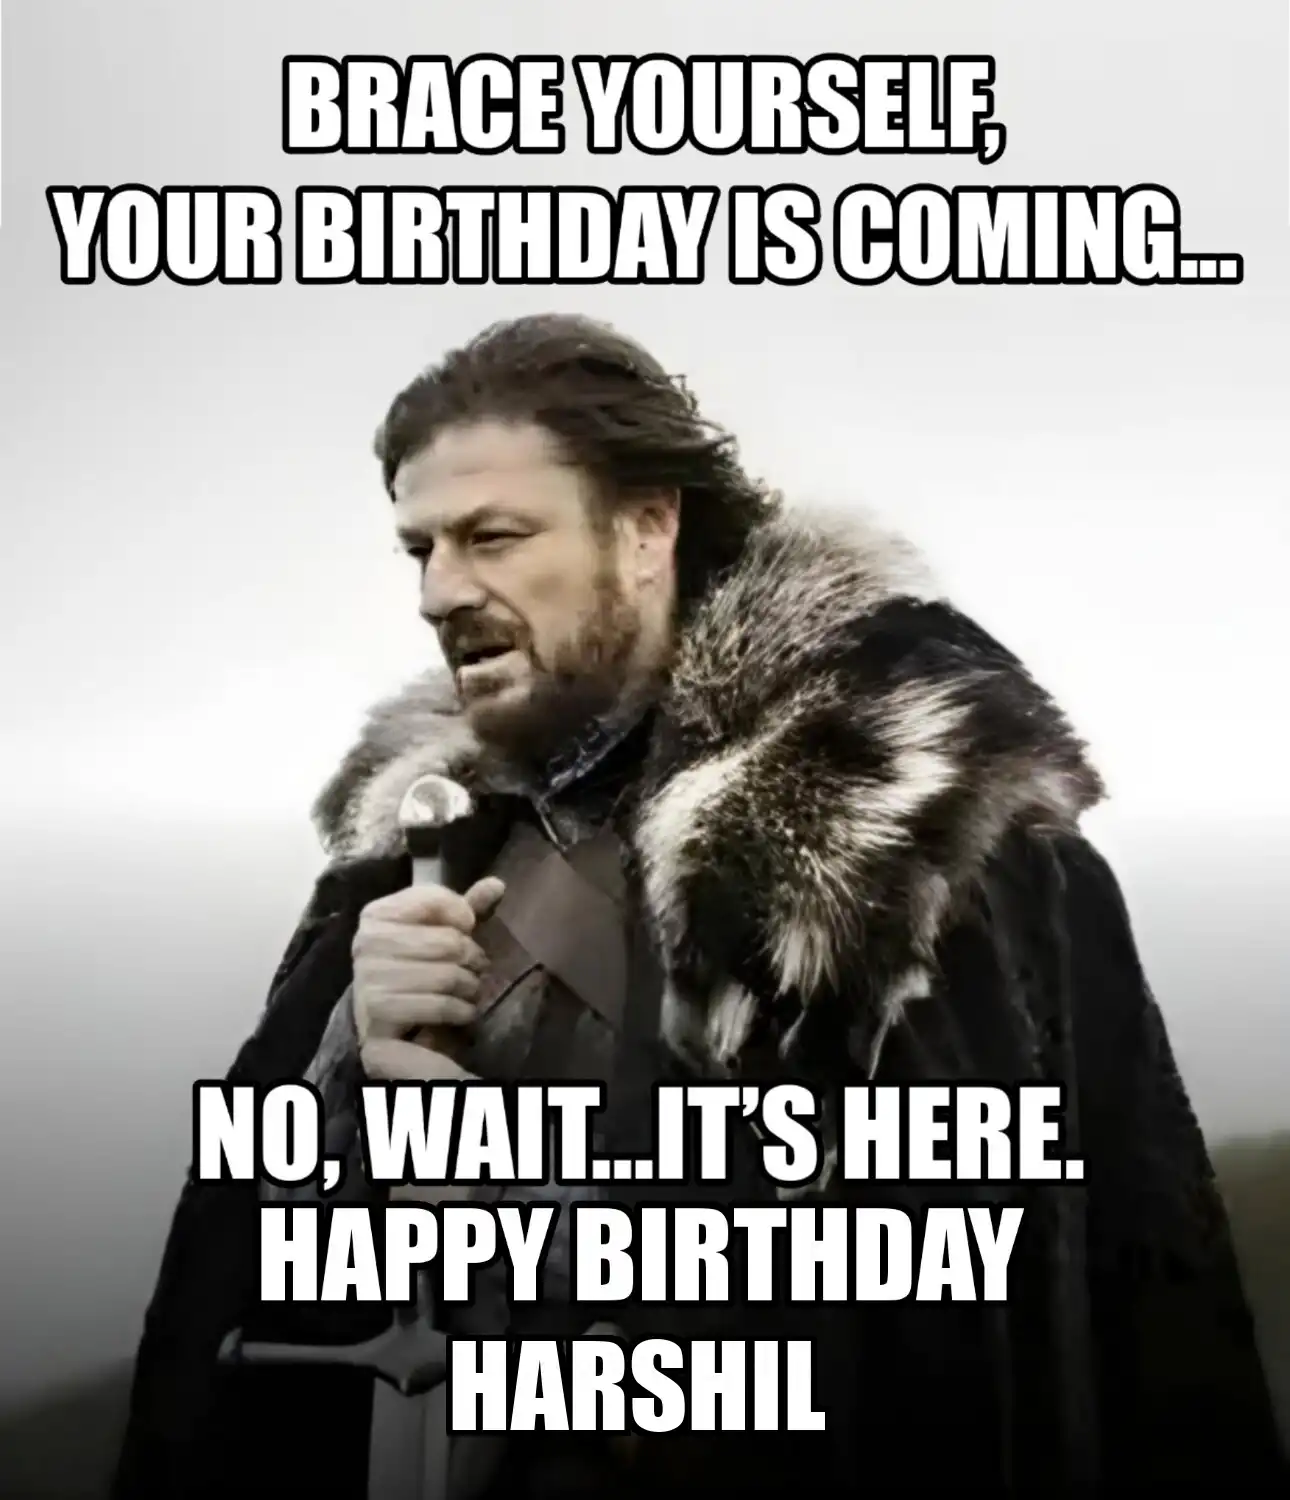 Happy Birthday Harshil Brace Yourself Your Birthday Is Coming Meme